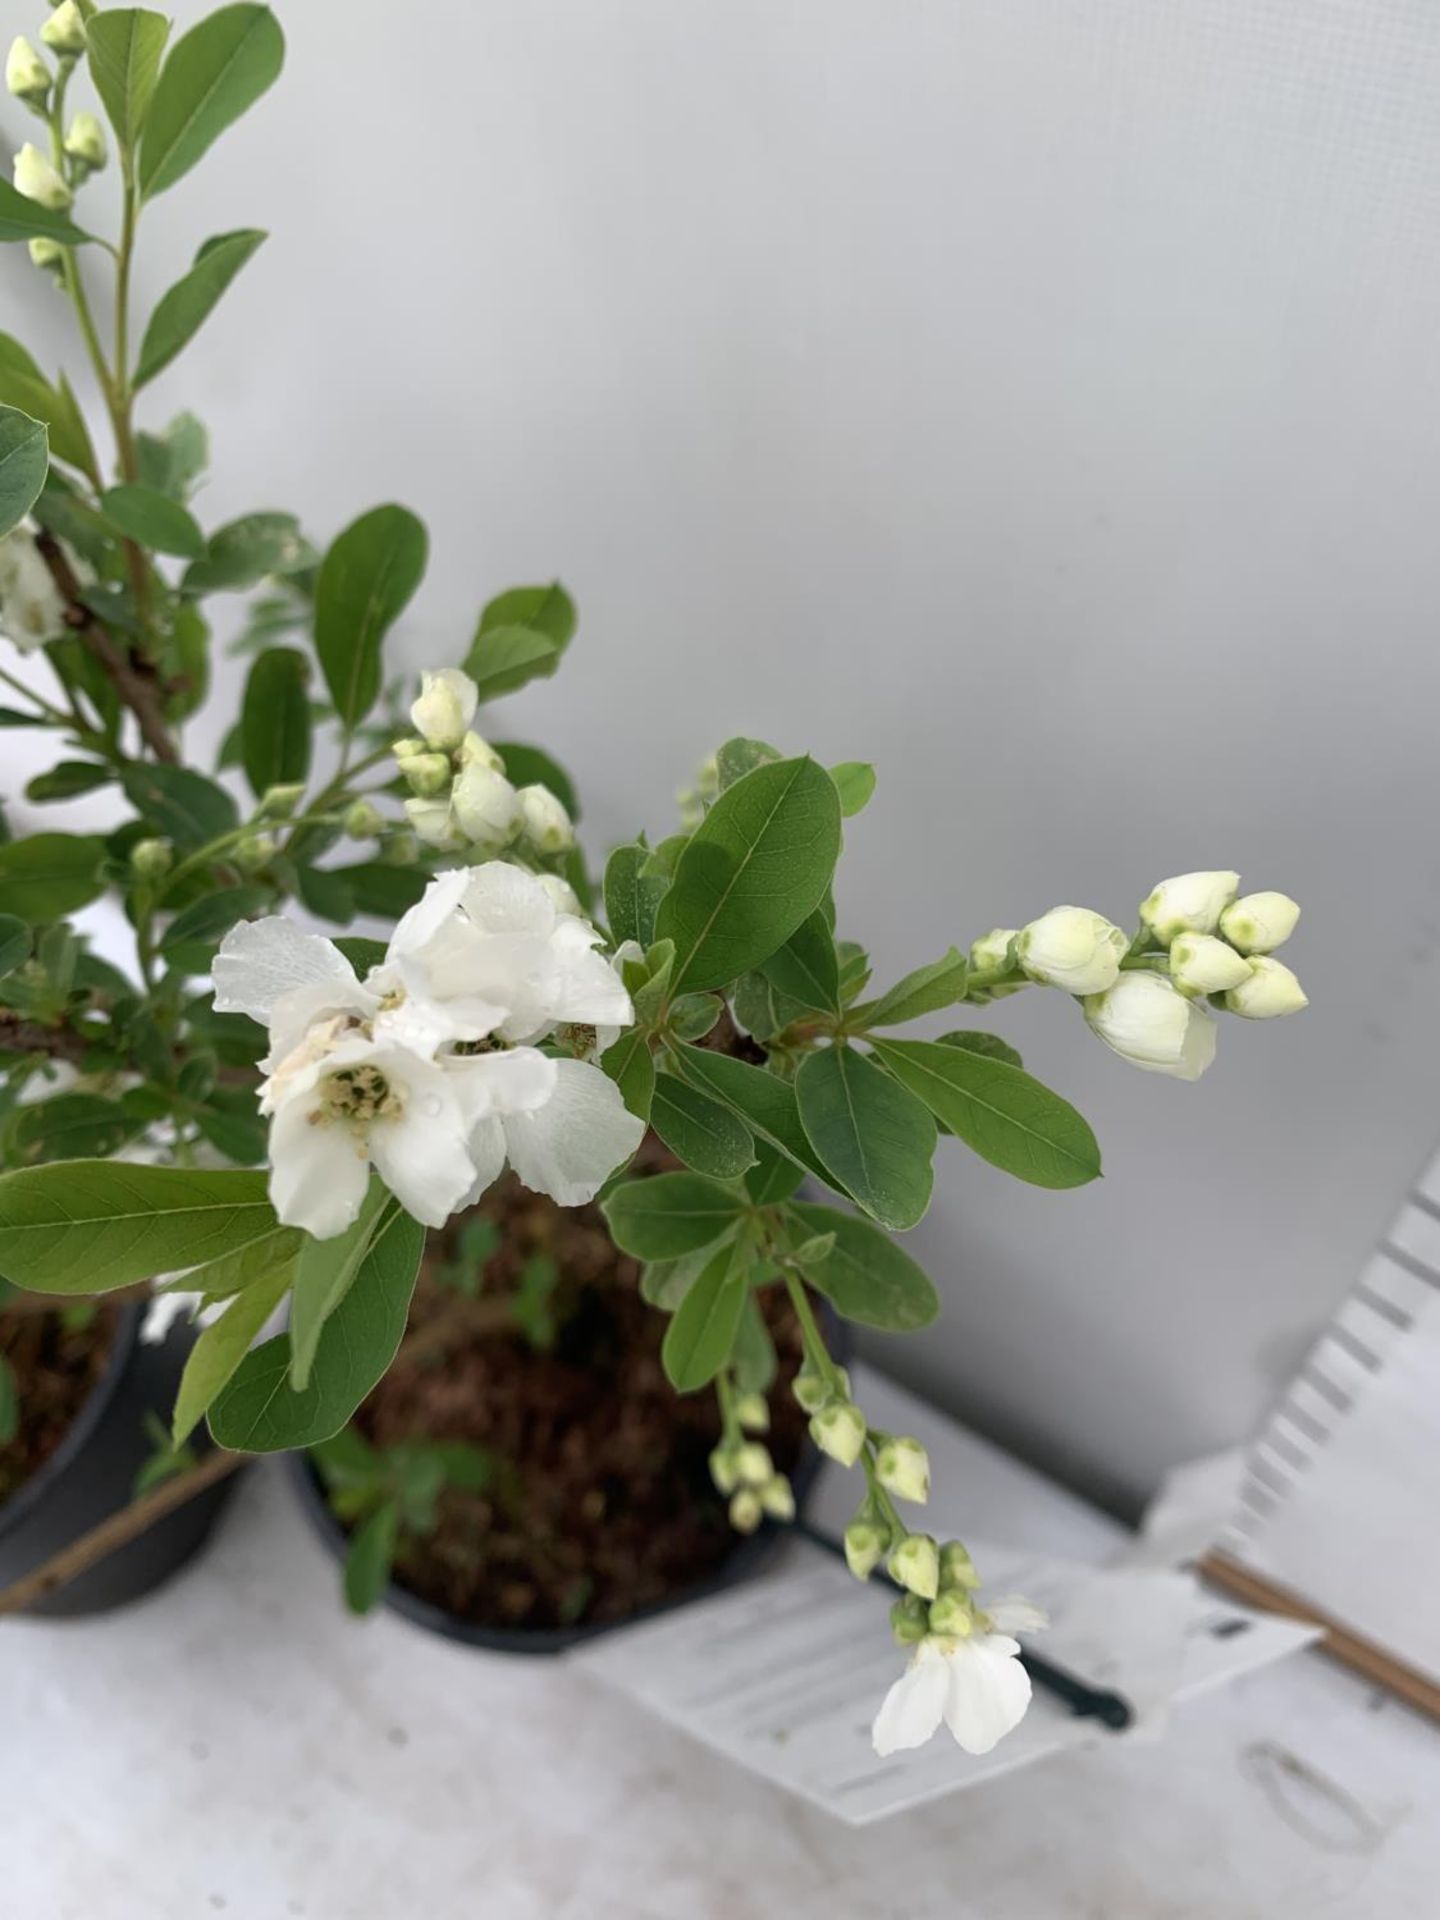 TWO EXOCHORDA RACEMOSA 'NIAGARA' IN 3 LTR POTS APPROX 65CM IN HEIGHT PLUS VAT TO BE SOLD FOR THE TWO - Image 10 of 12